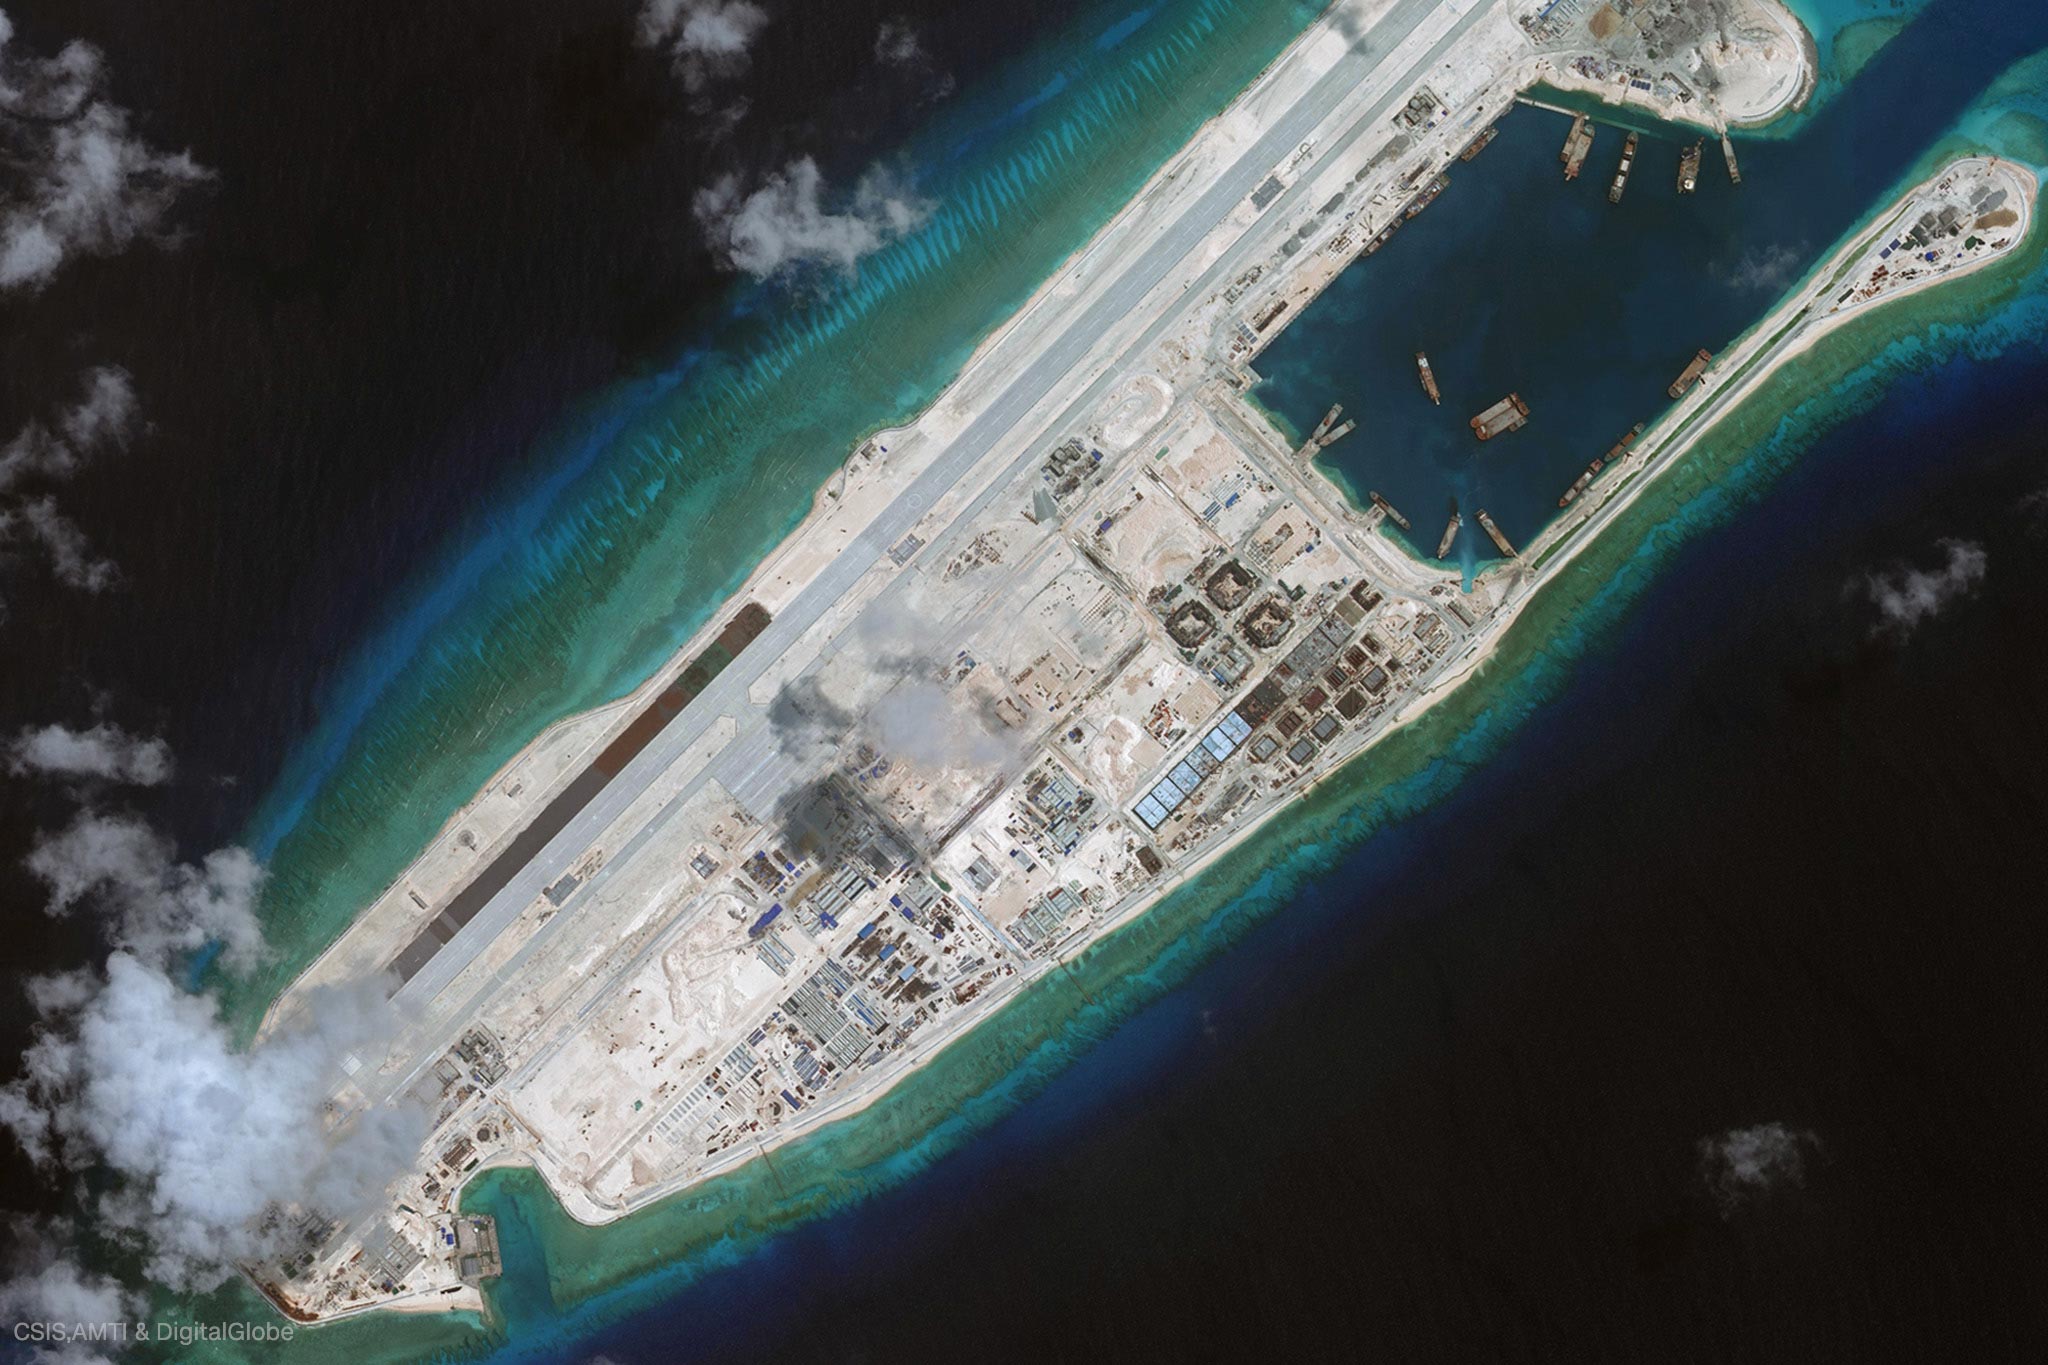 South China Sea: A view from the air of one of the world's ...